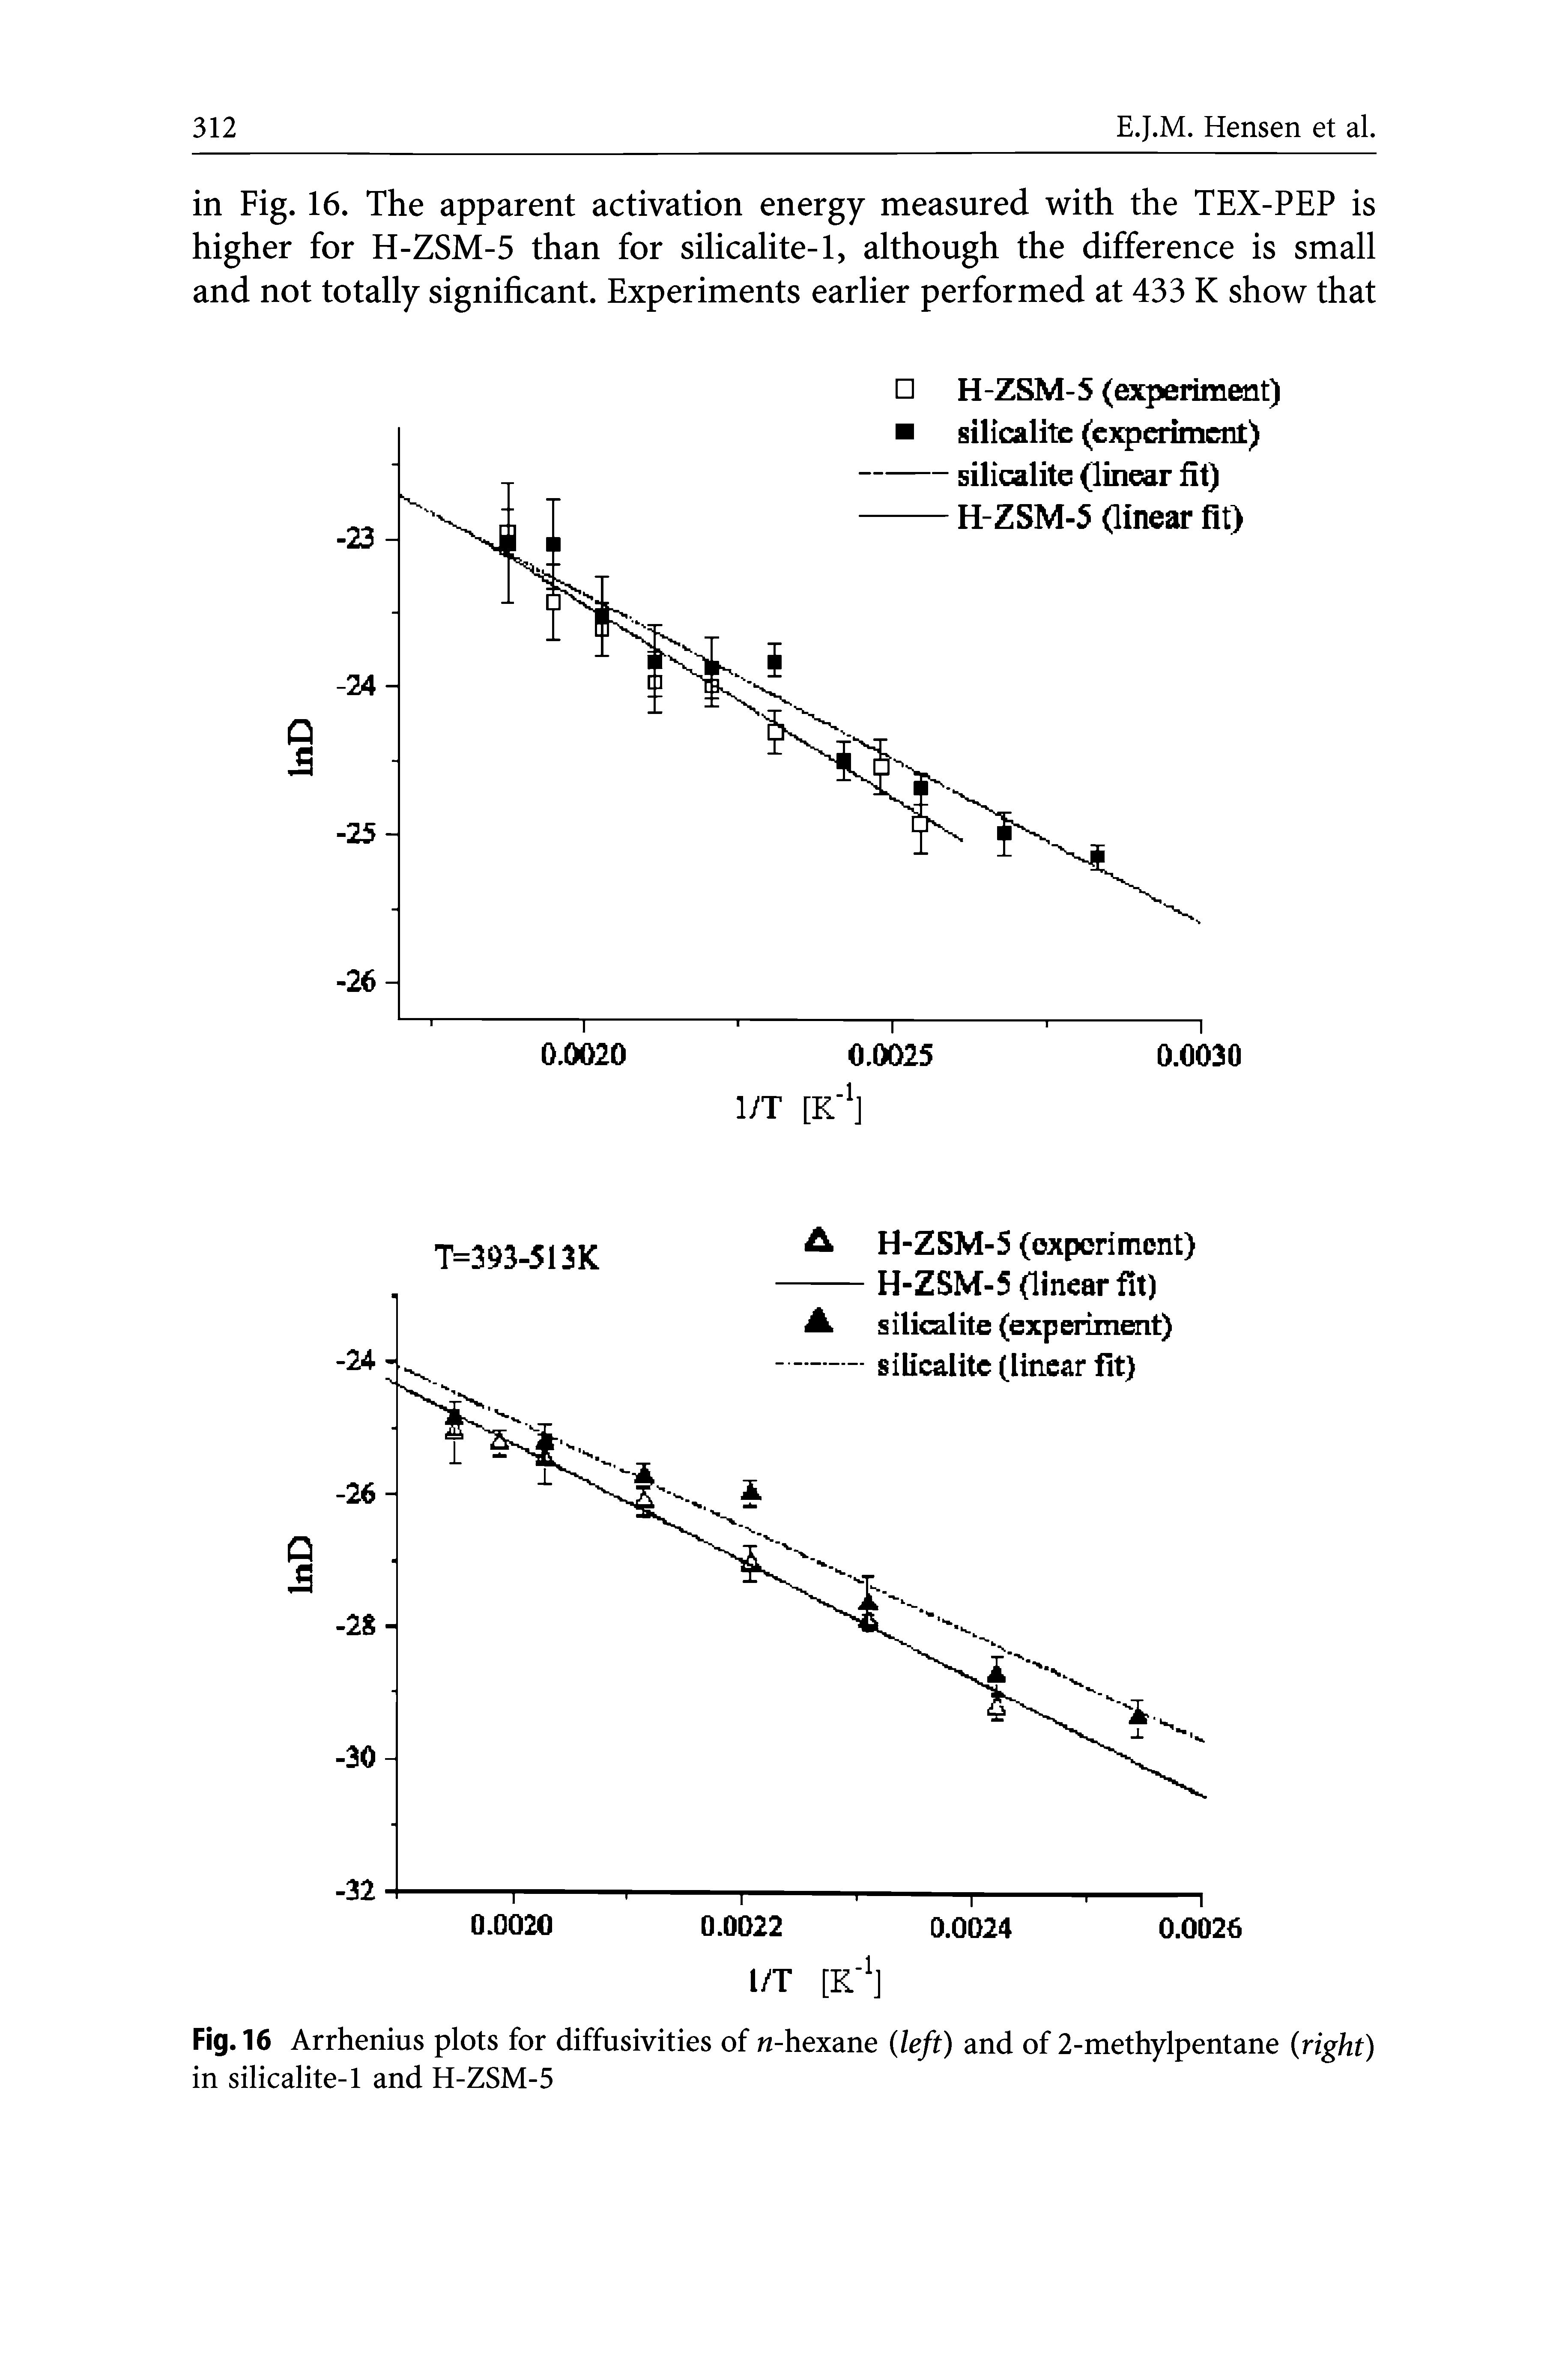 Fig. 16 Arrhenius plots for diffusivities of n-hexane left) and of 2-methylpentane right) in silicalite-1 and H-ZSM-5...